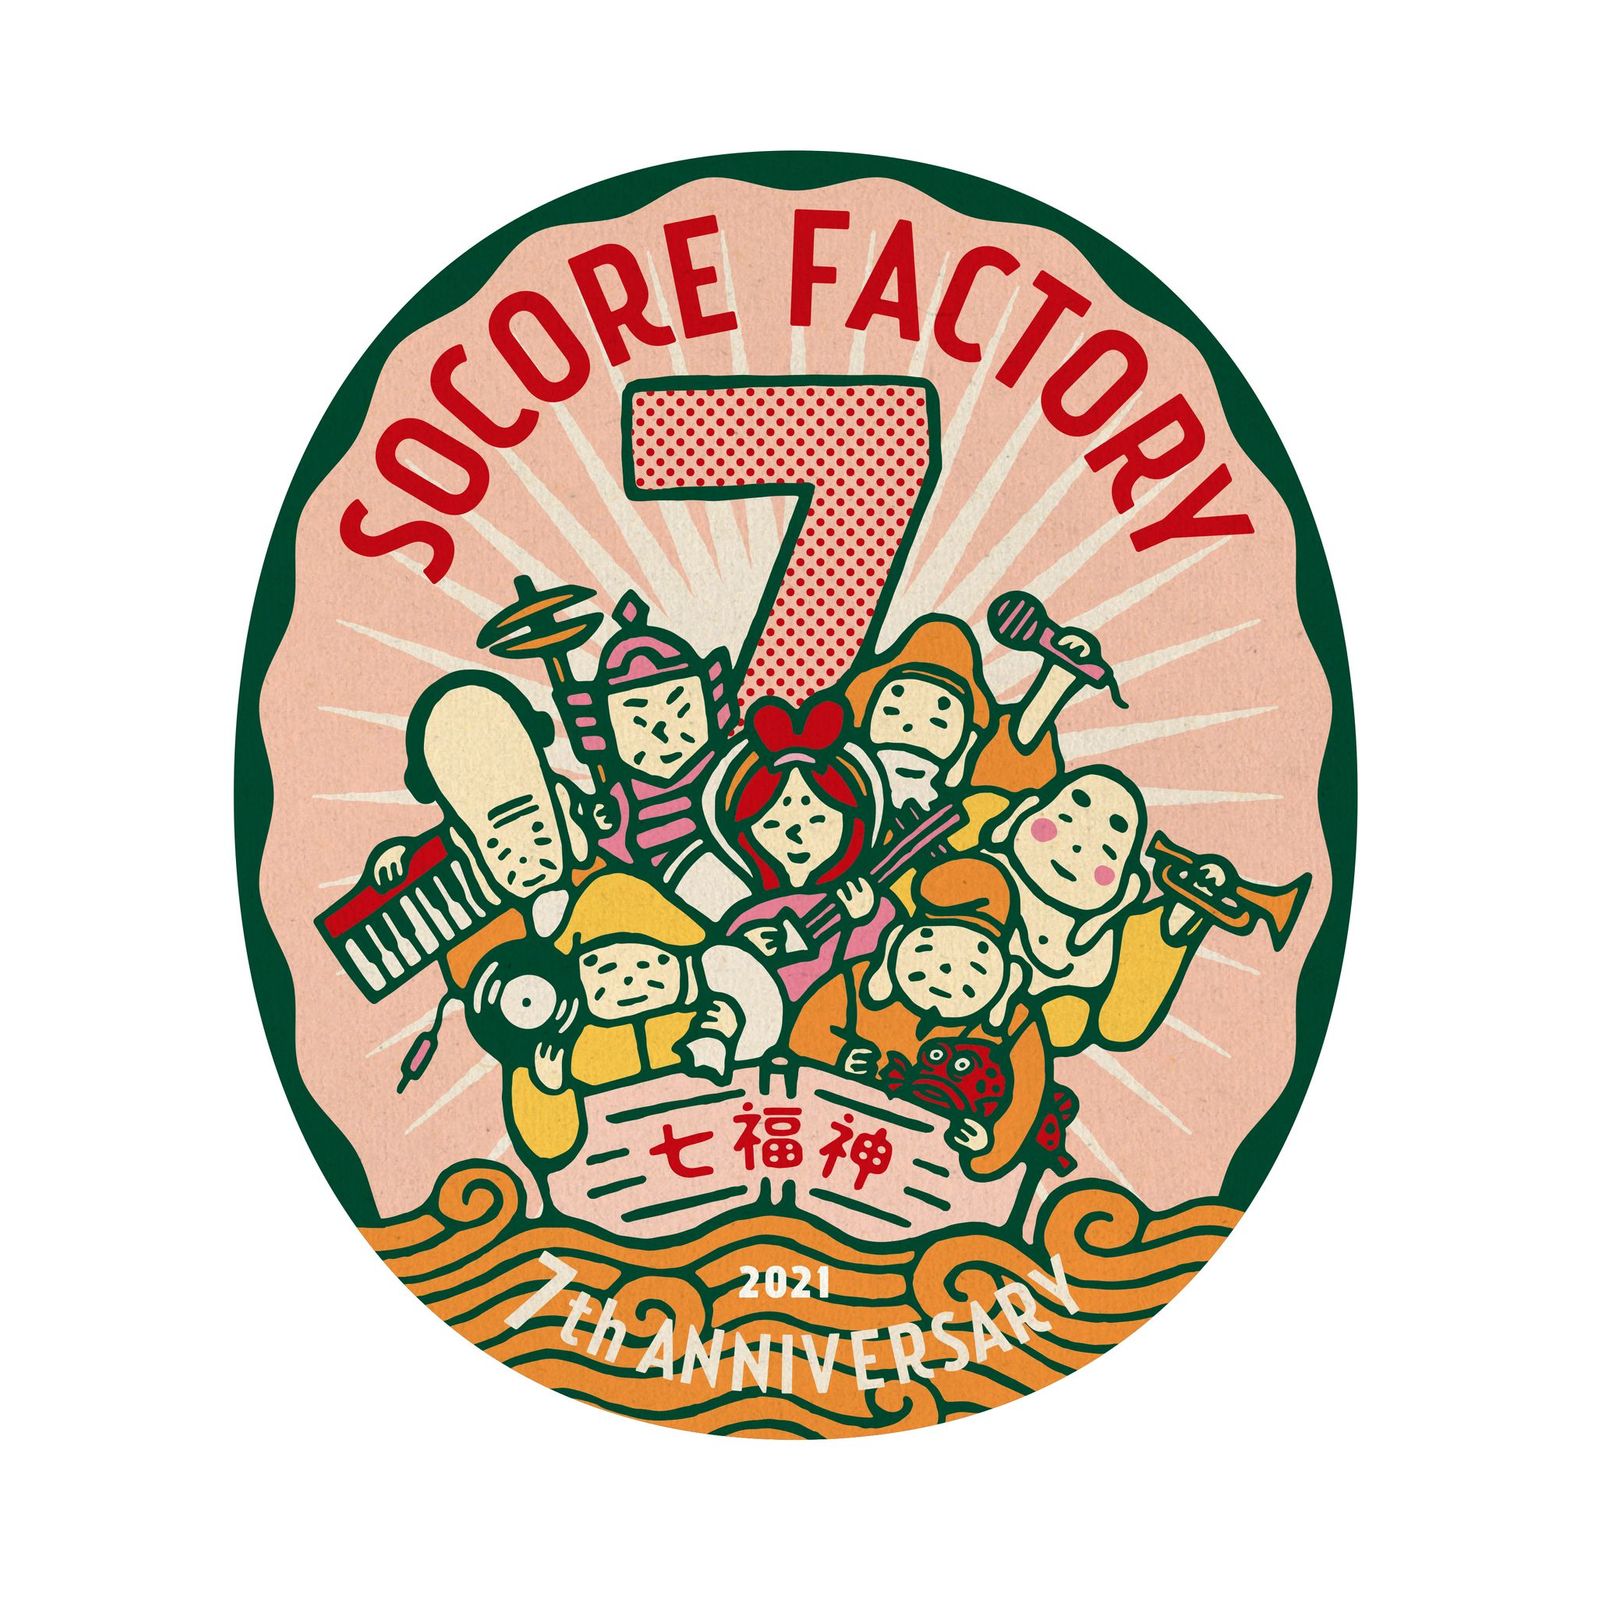 SOCORE FACTORY 7th MONTHLY EVENT